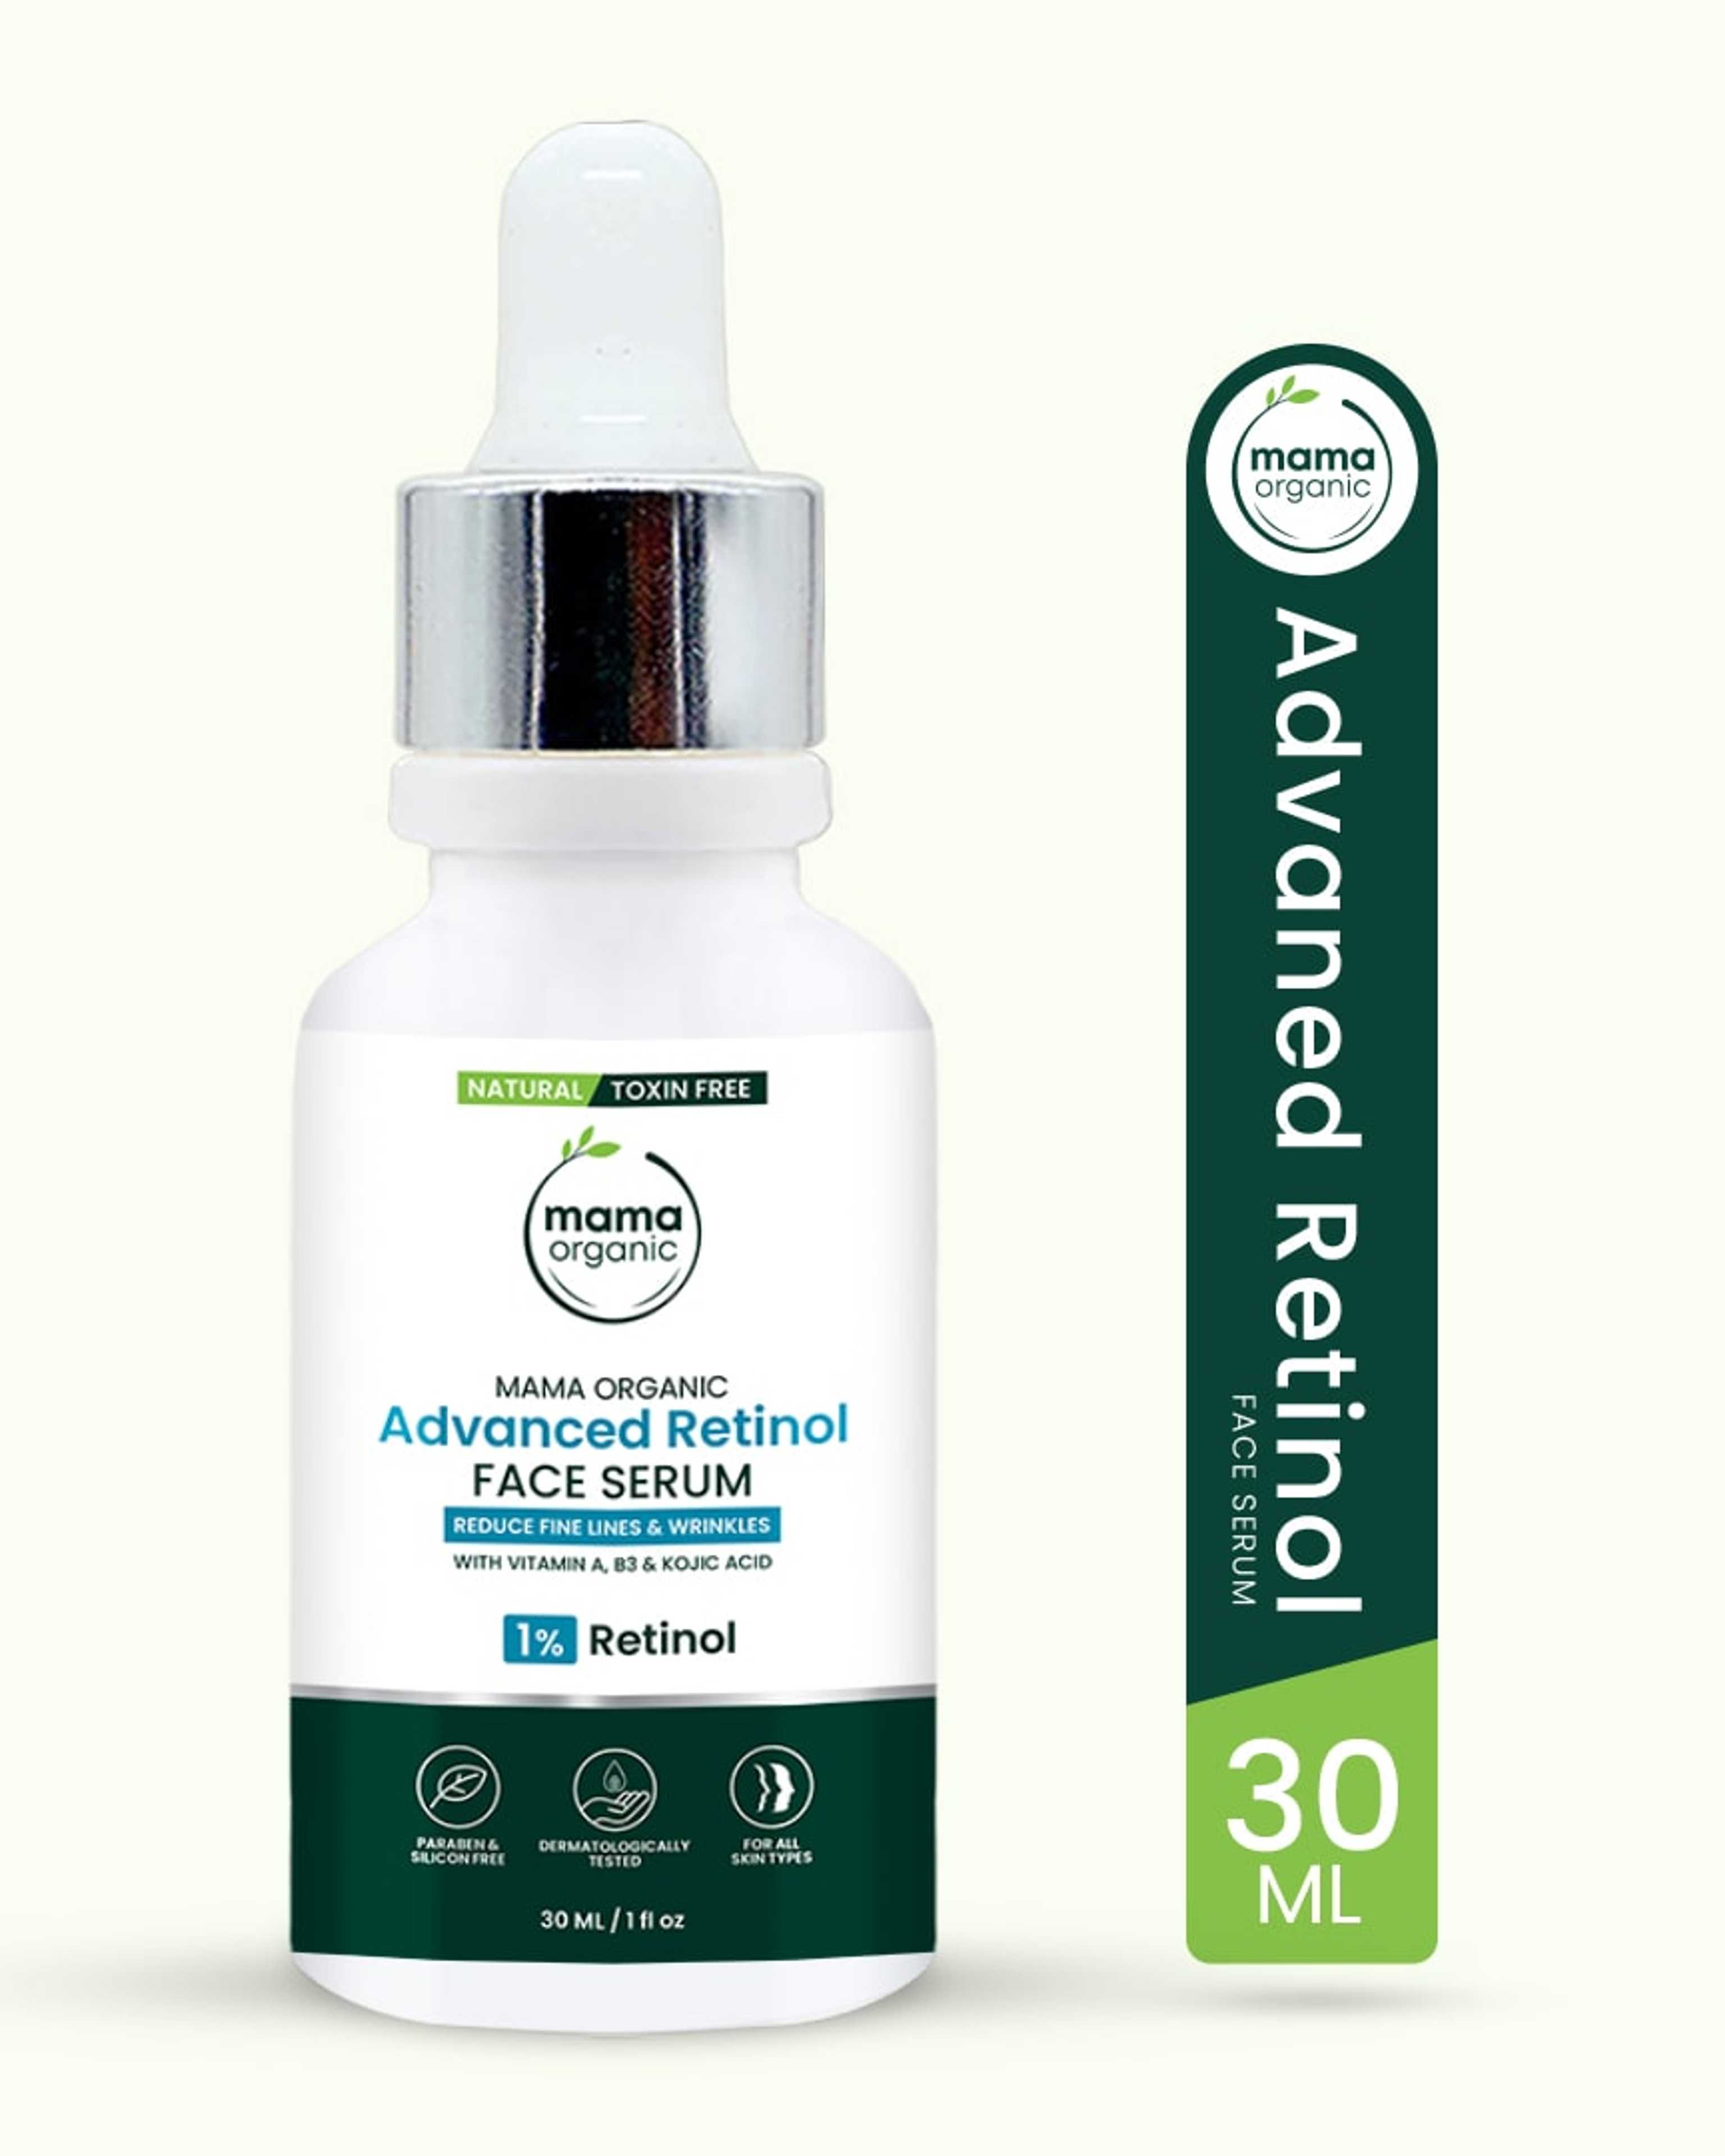 Mama Organic Advance Retinol Face Serum For Reduce Fine Lines & Wrinkles | For Anti-Aging | Natural & Toxin-Free - 30ml